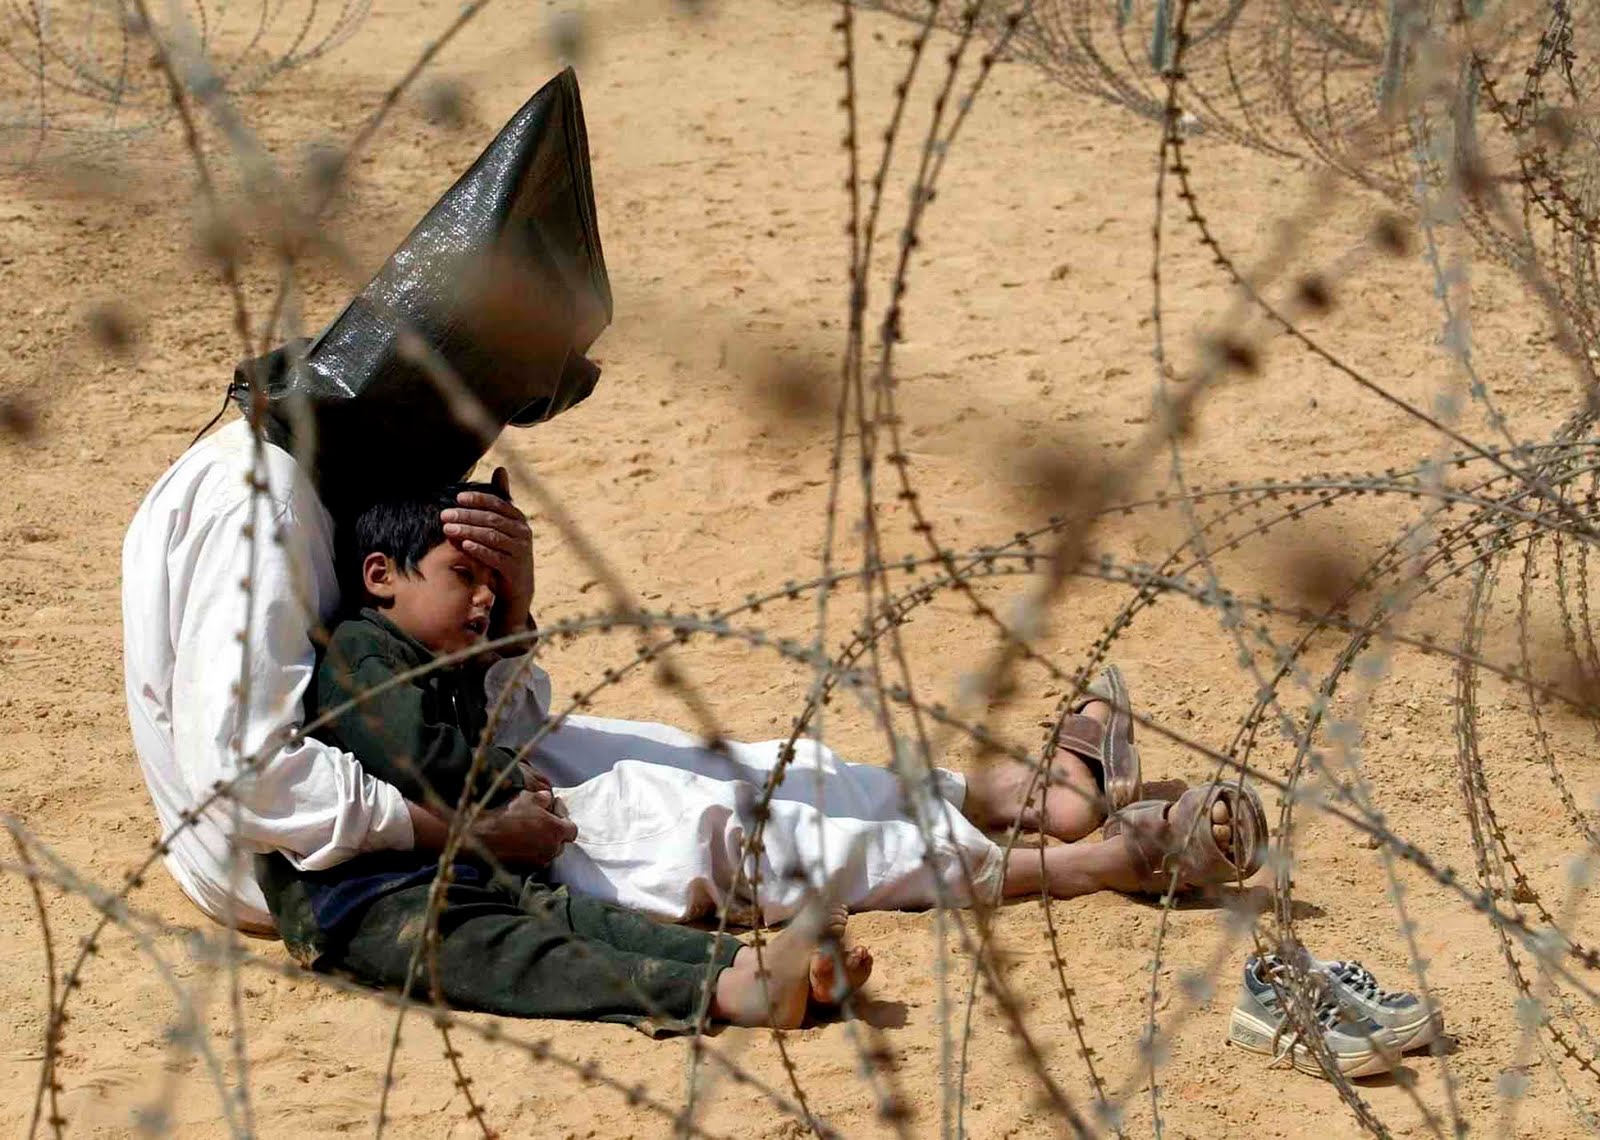 An Iraqi man comforts his son at a holding center for prisoners of war in An Najaf, Iraq, 31 March 2003.